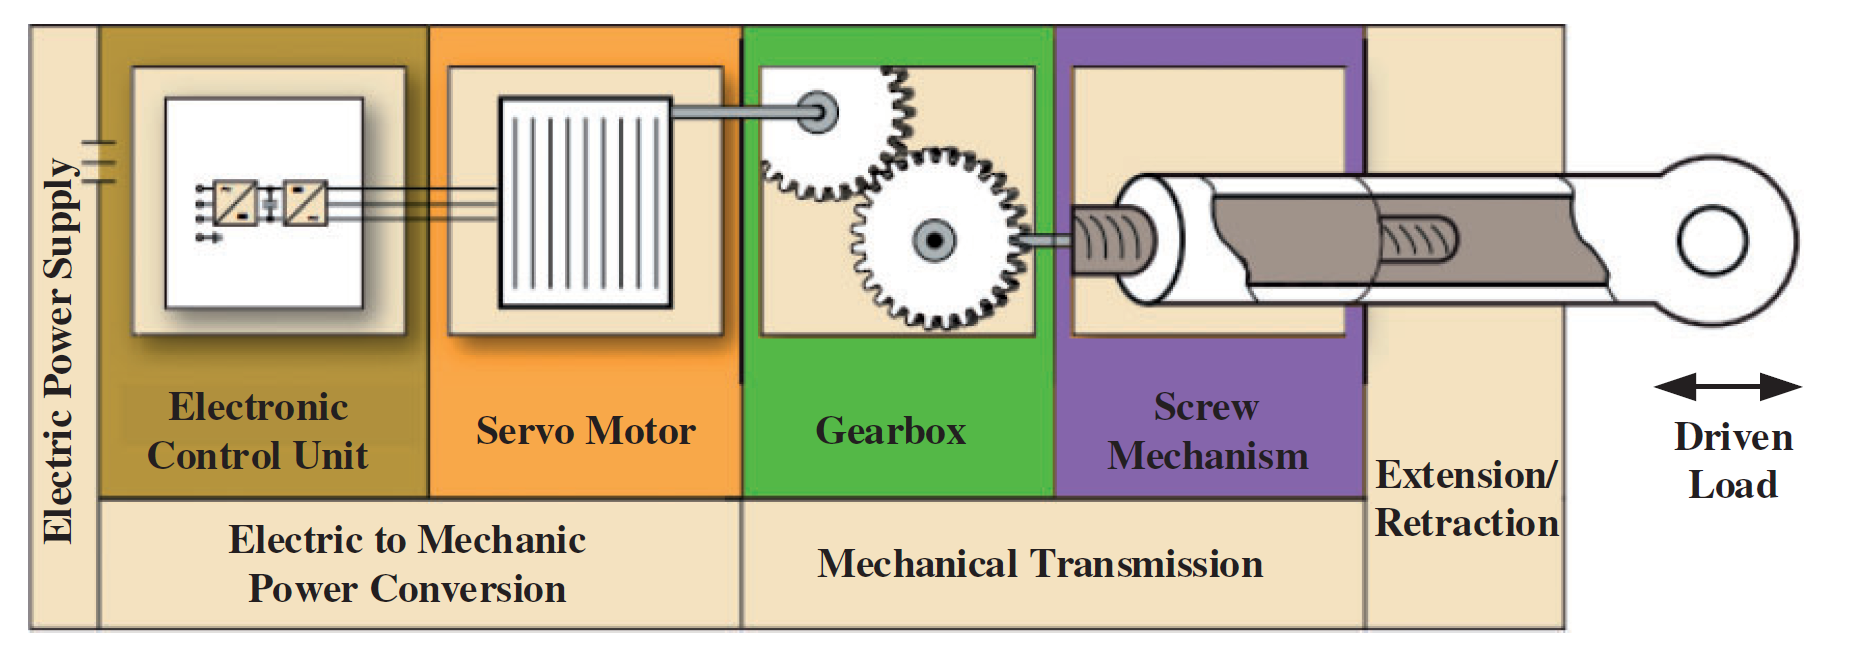 Diagram illustrating the main components involved in converting electric power to actuator movement in an electromechanical actuator. Source: Qiao et al. A review of electromechanical actuators for More/All Electric aircraft systems. (Click image to enlarge)